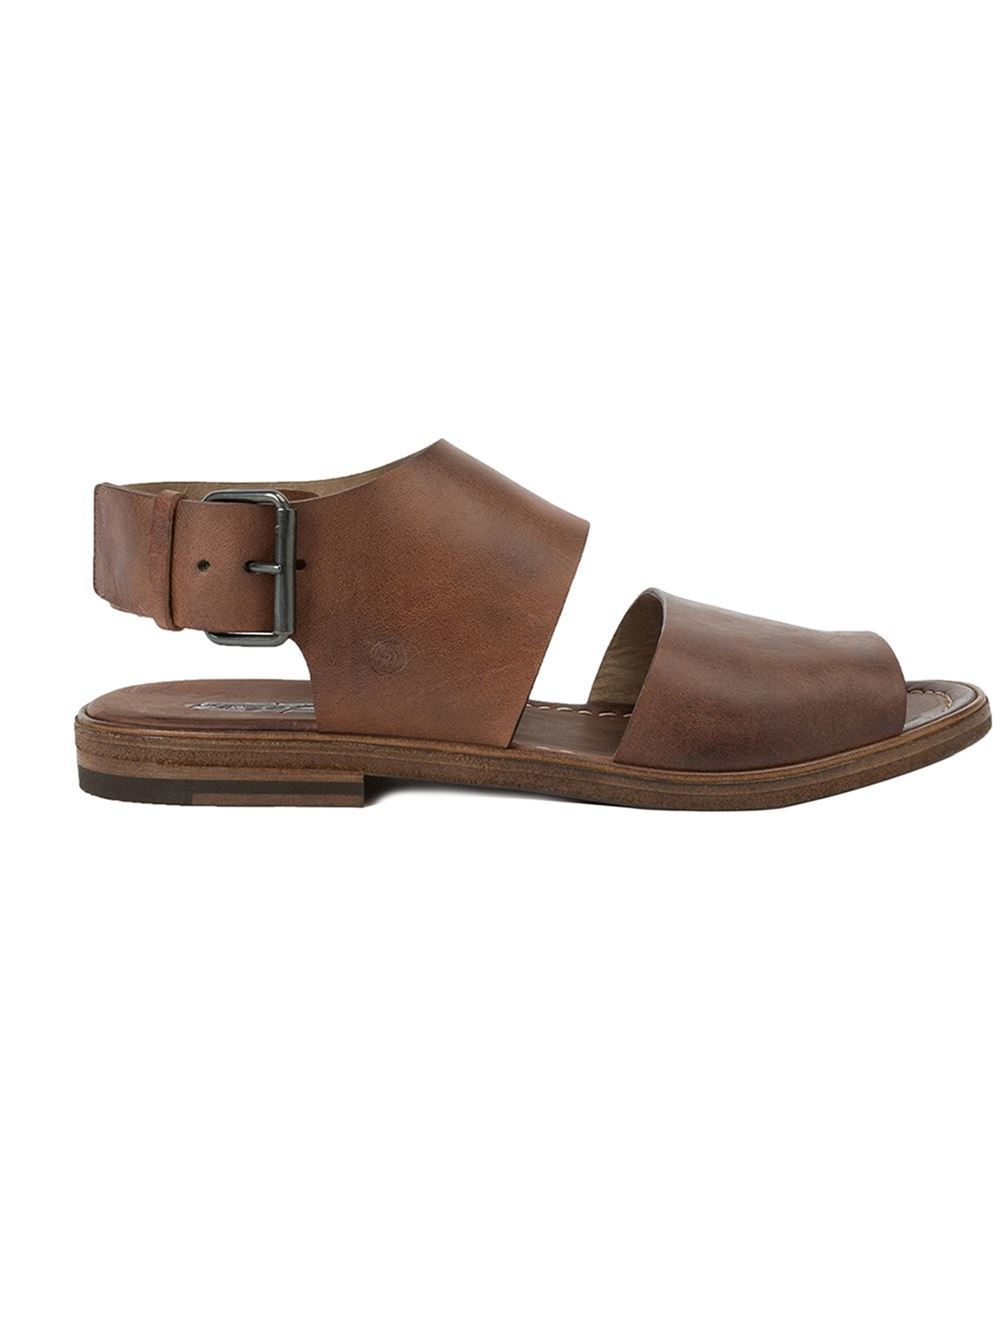 Lyst Mars ll lego Sandals  in Brown for Men